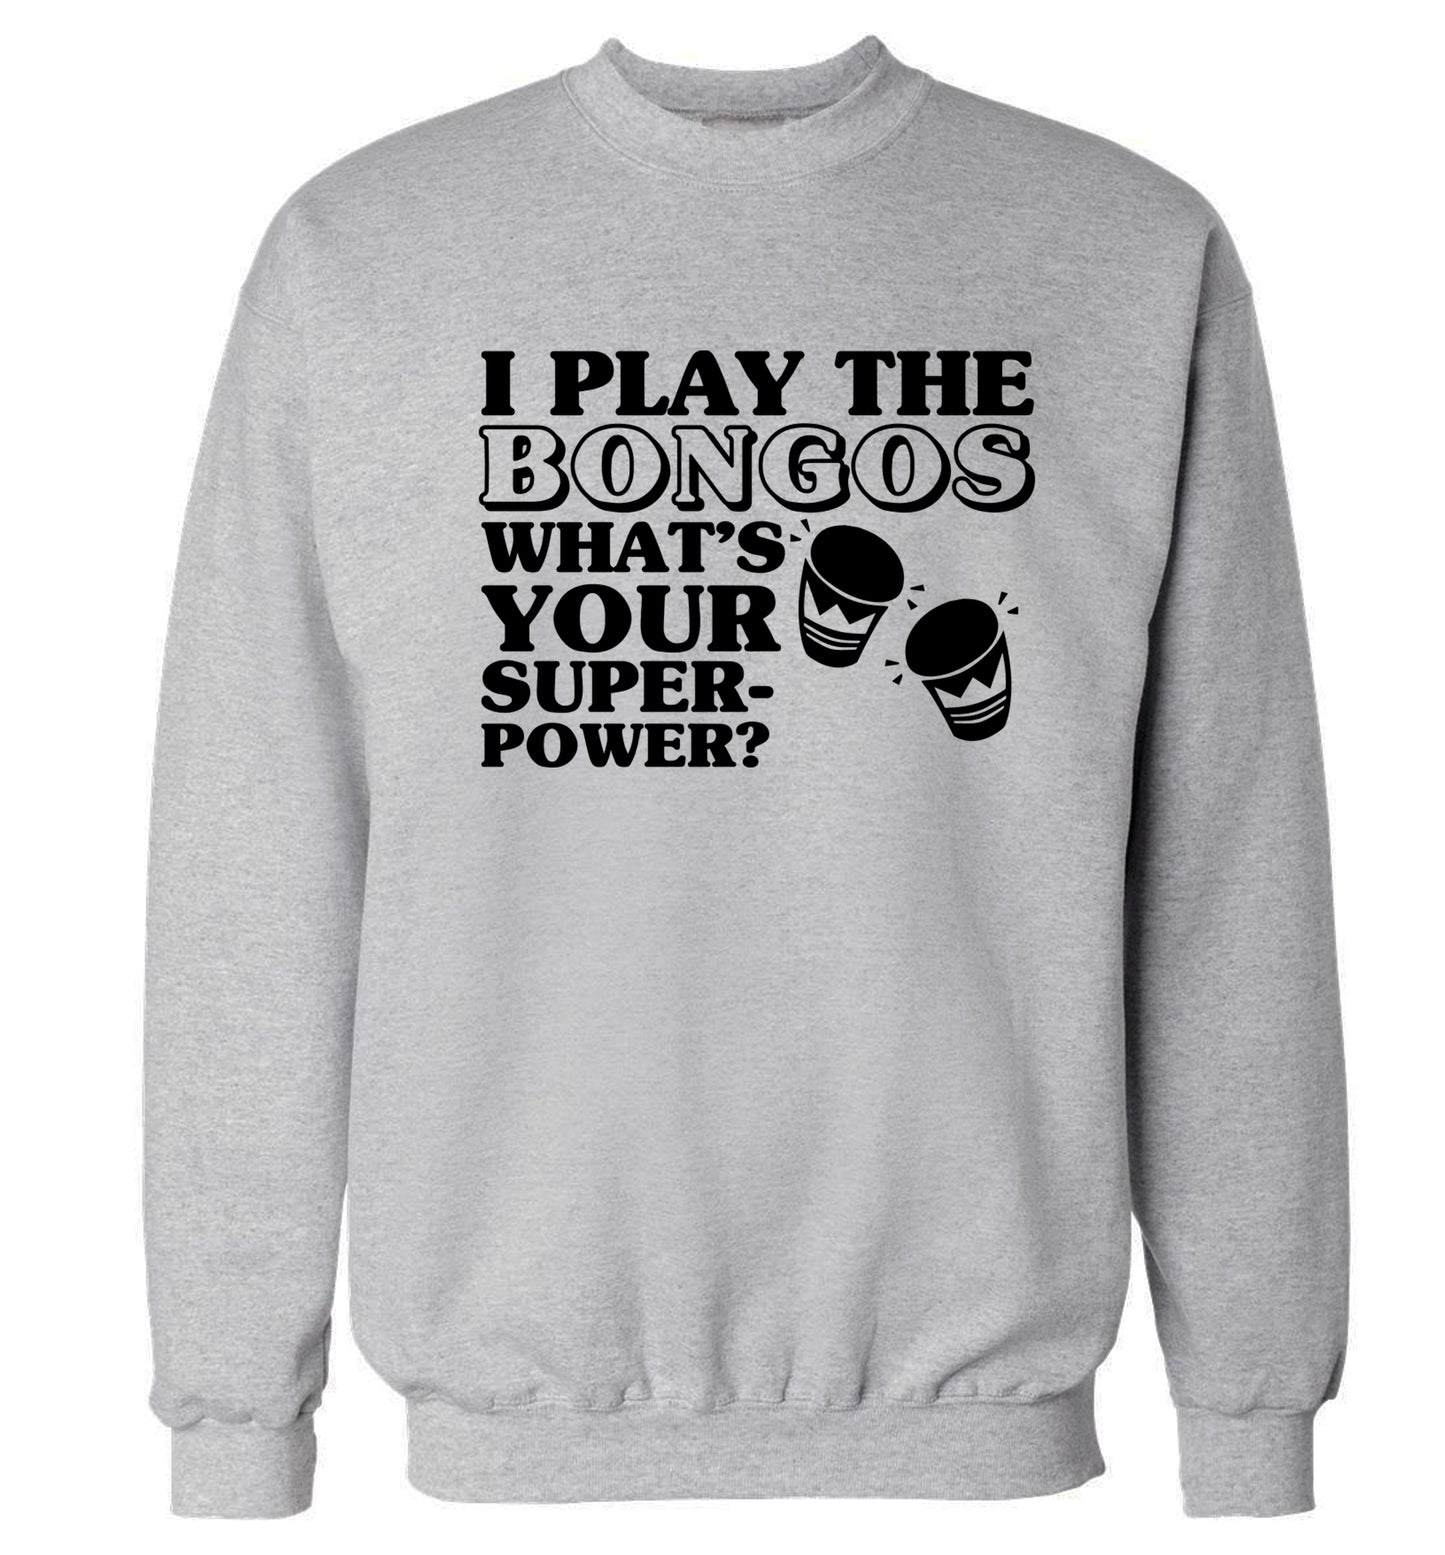 I play the bongos what's your superpower? Adult's unisexgrey Sweater 2XL